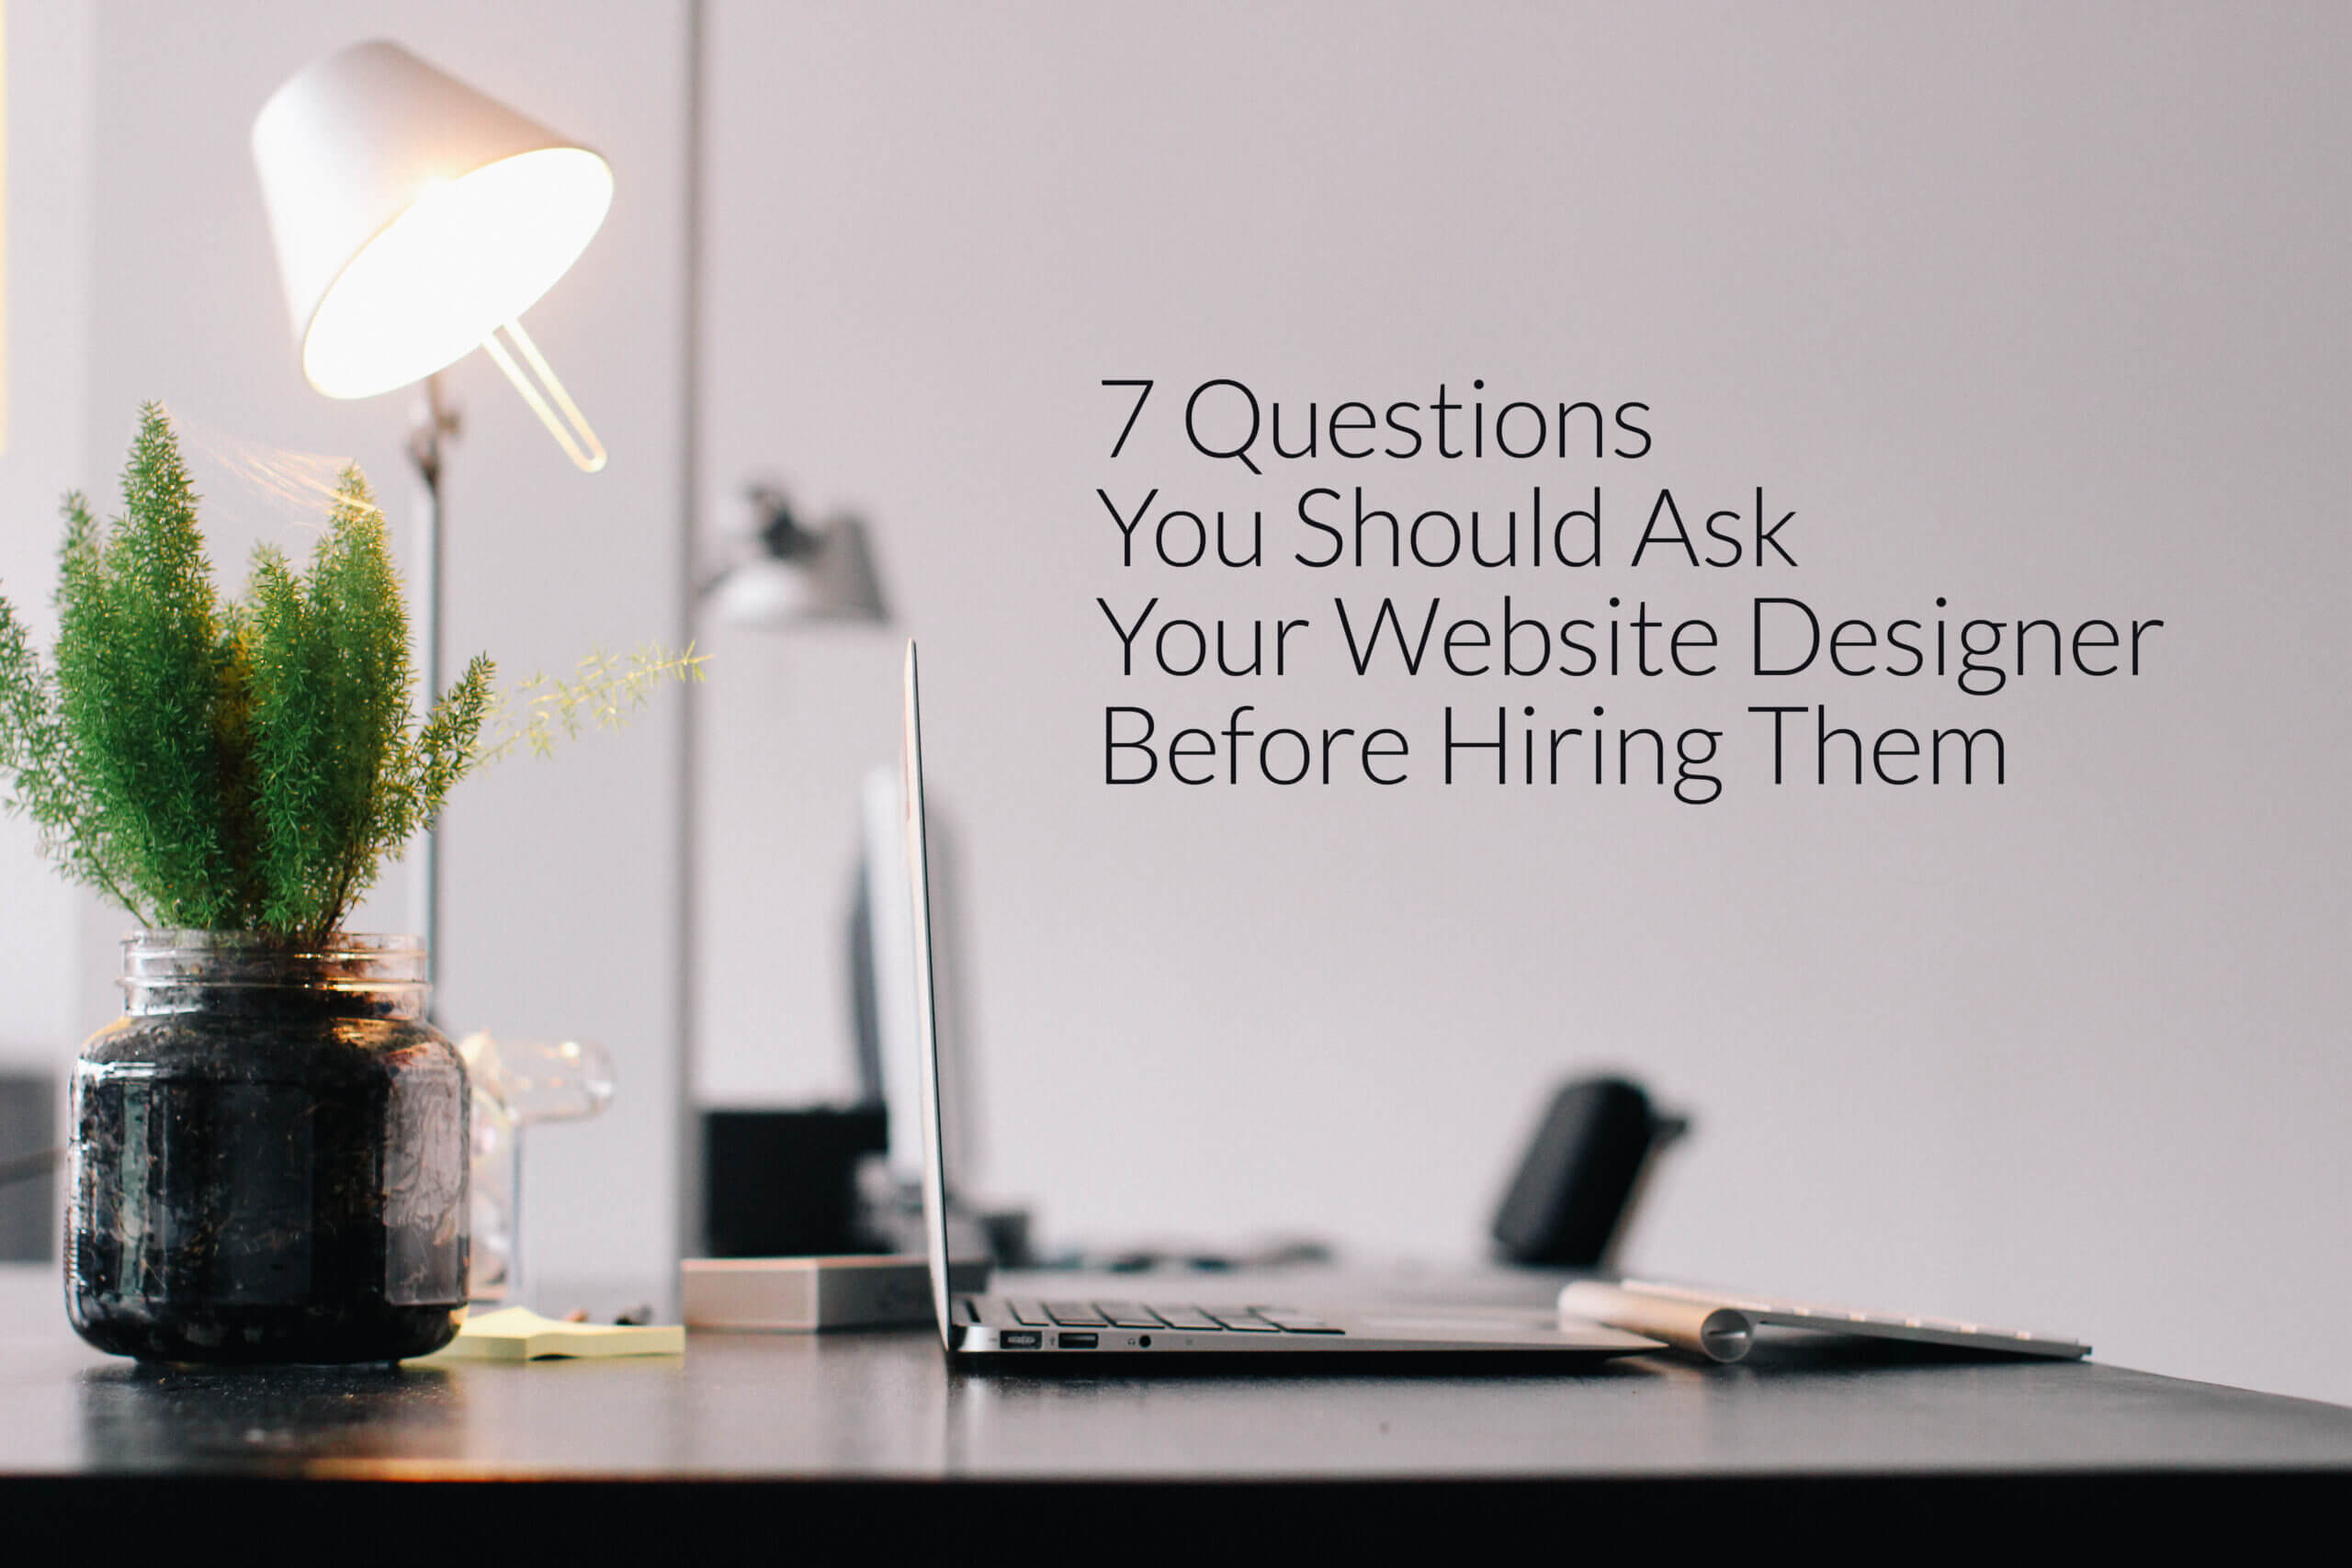 7 Questions You Should Ask Your Website Designer Before Hiring Them